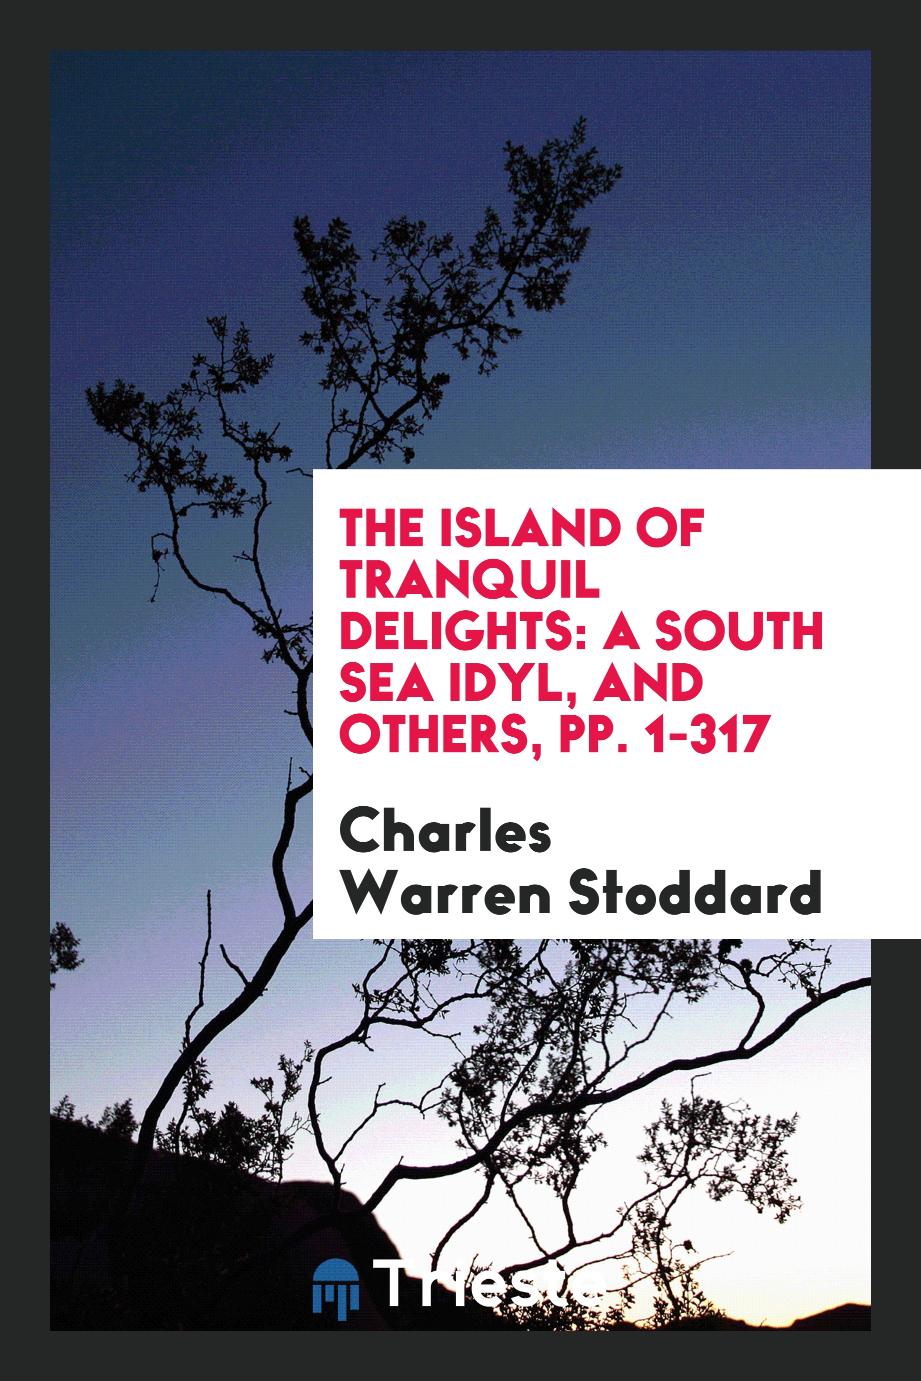 The Island of Tranquil Delights: A South Sea Idyl, and Others, pp. 1-317